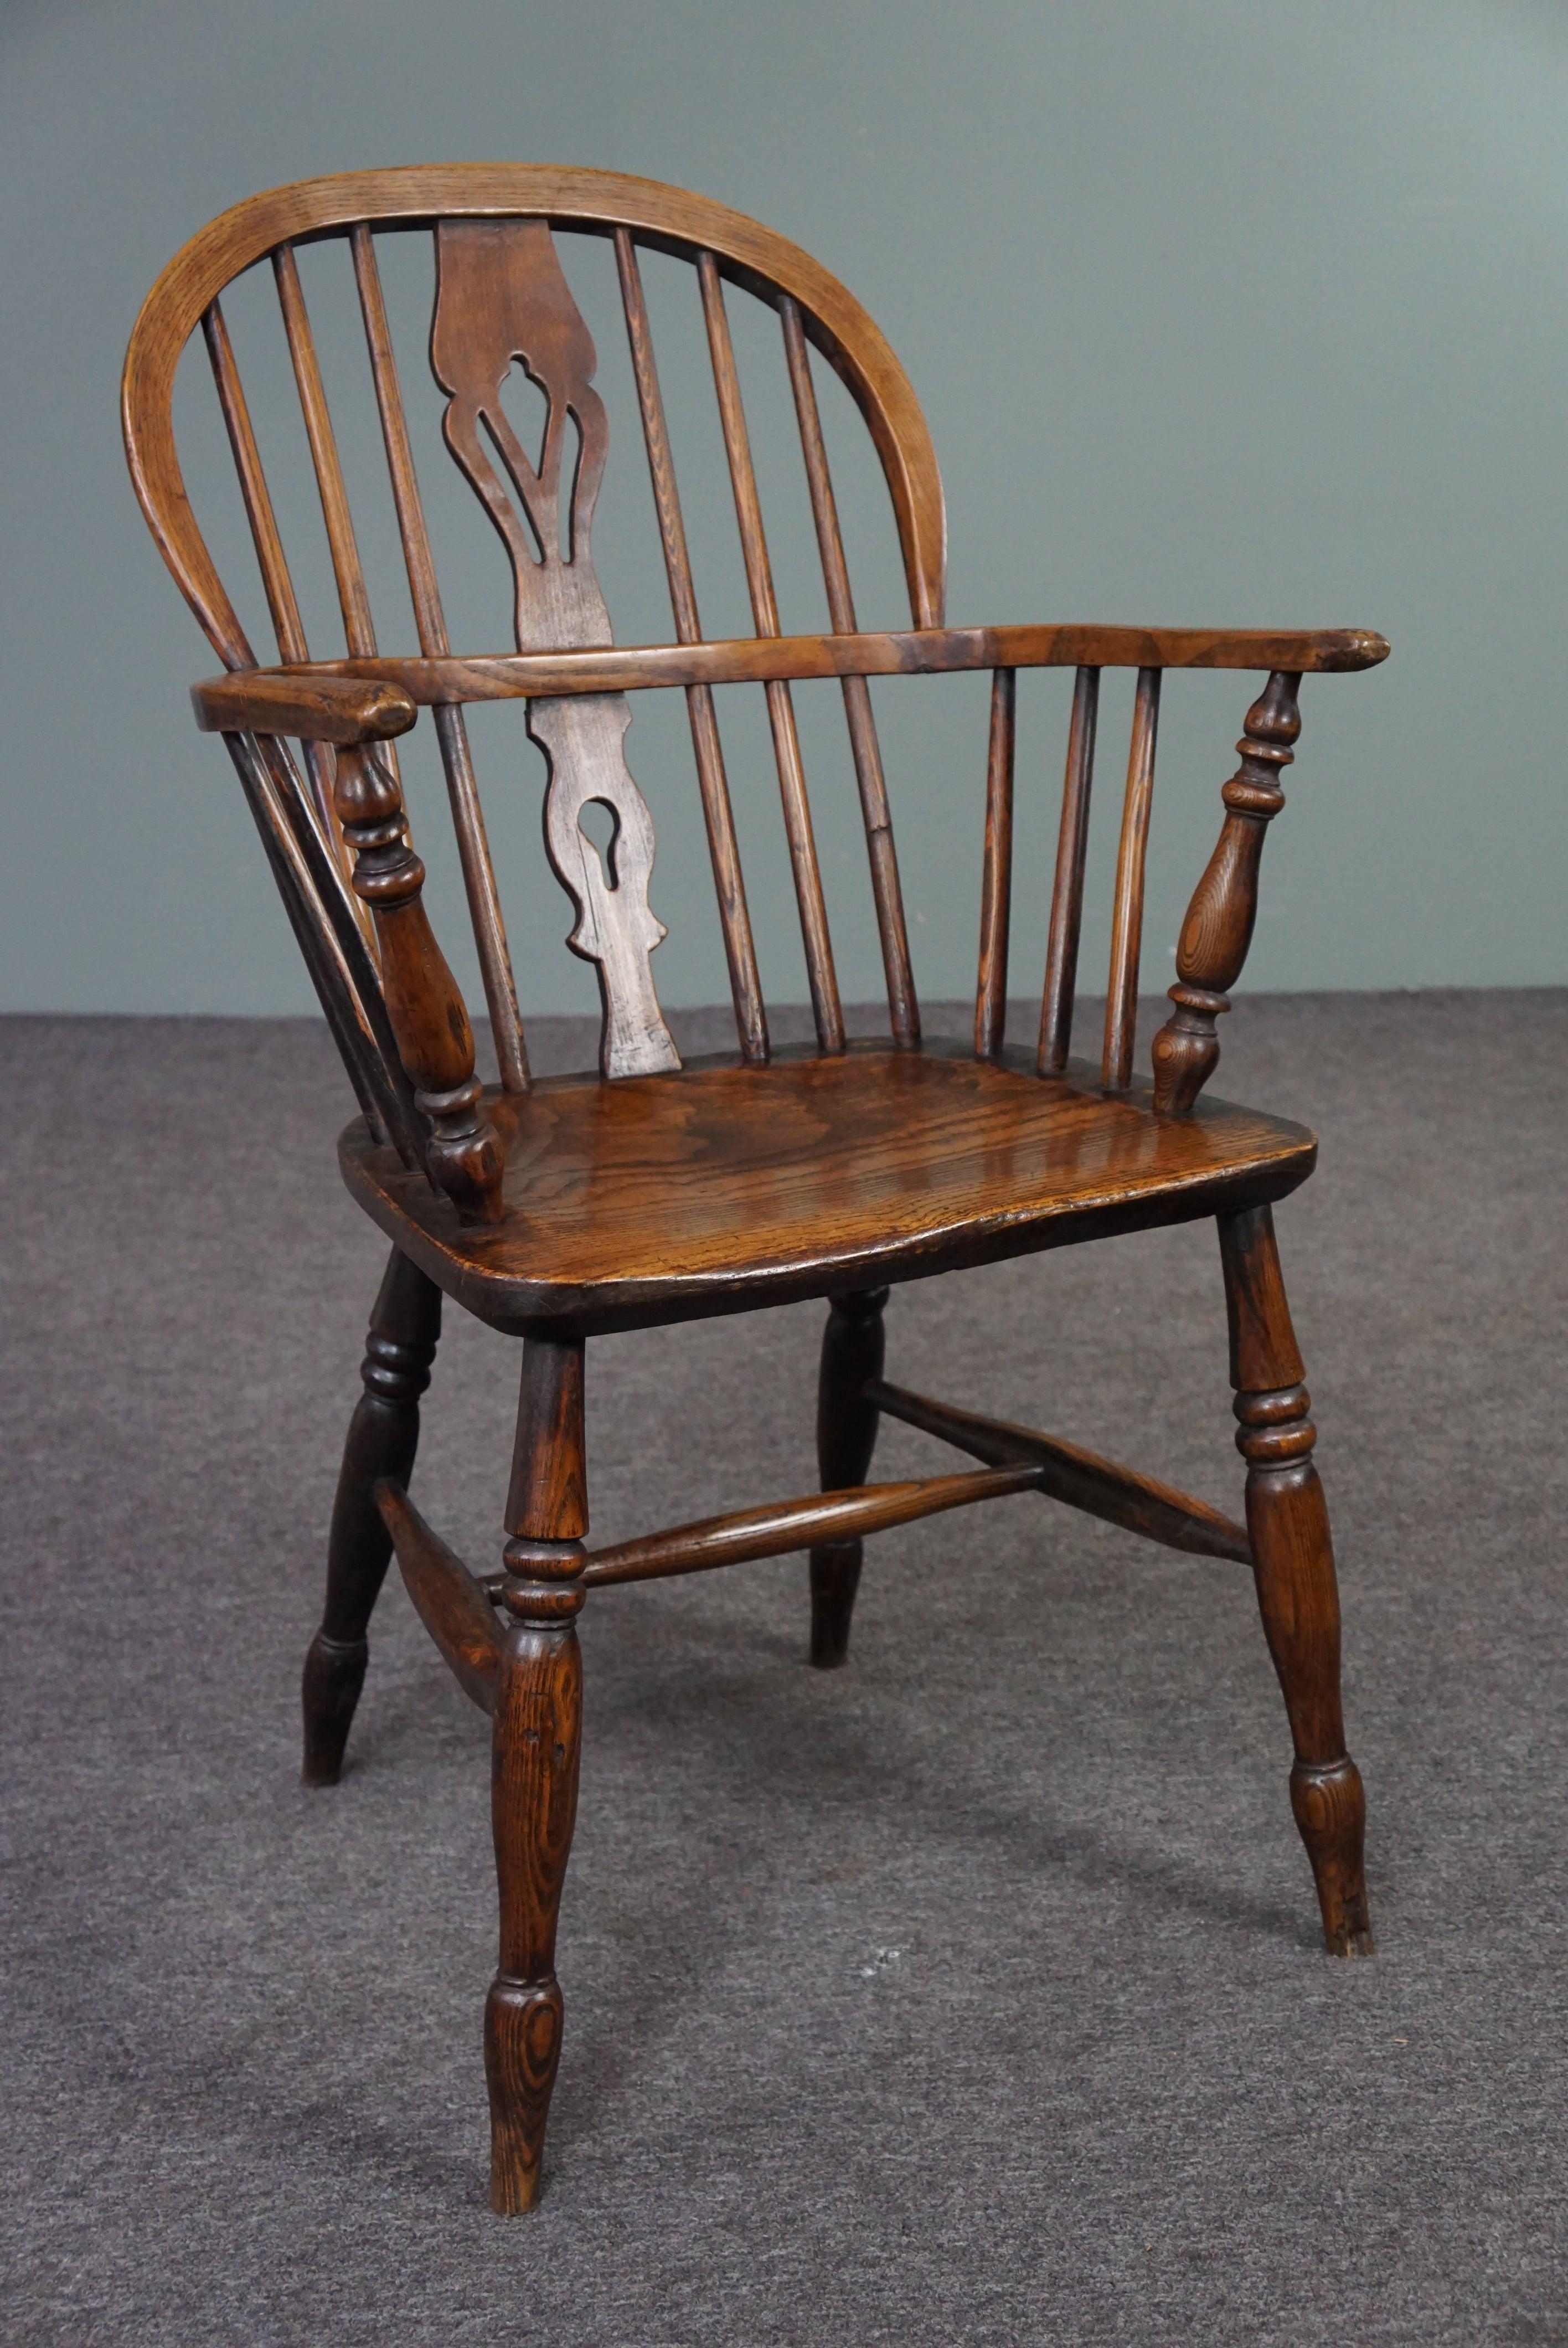 Offered is this beautiful antique armchair made of solid wood with a very beautiful characteristic appearance.

This striking English antique Windsor armchair with armrests has a well-shaped thick solid wooden seat. The chair has charming turned